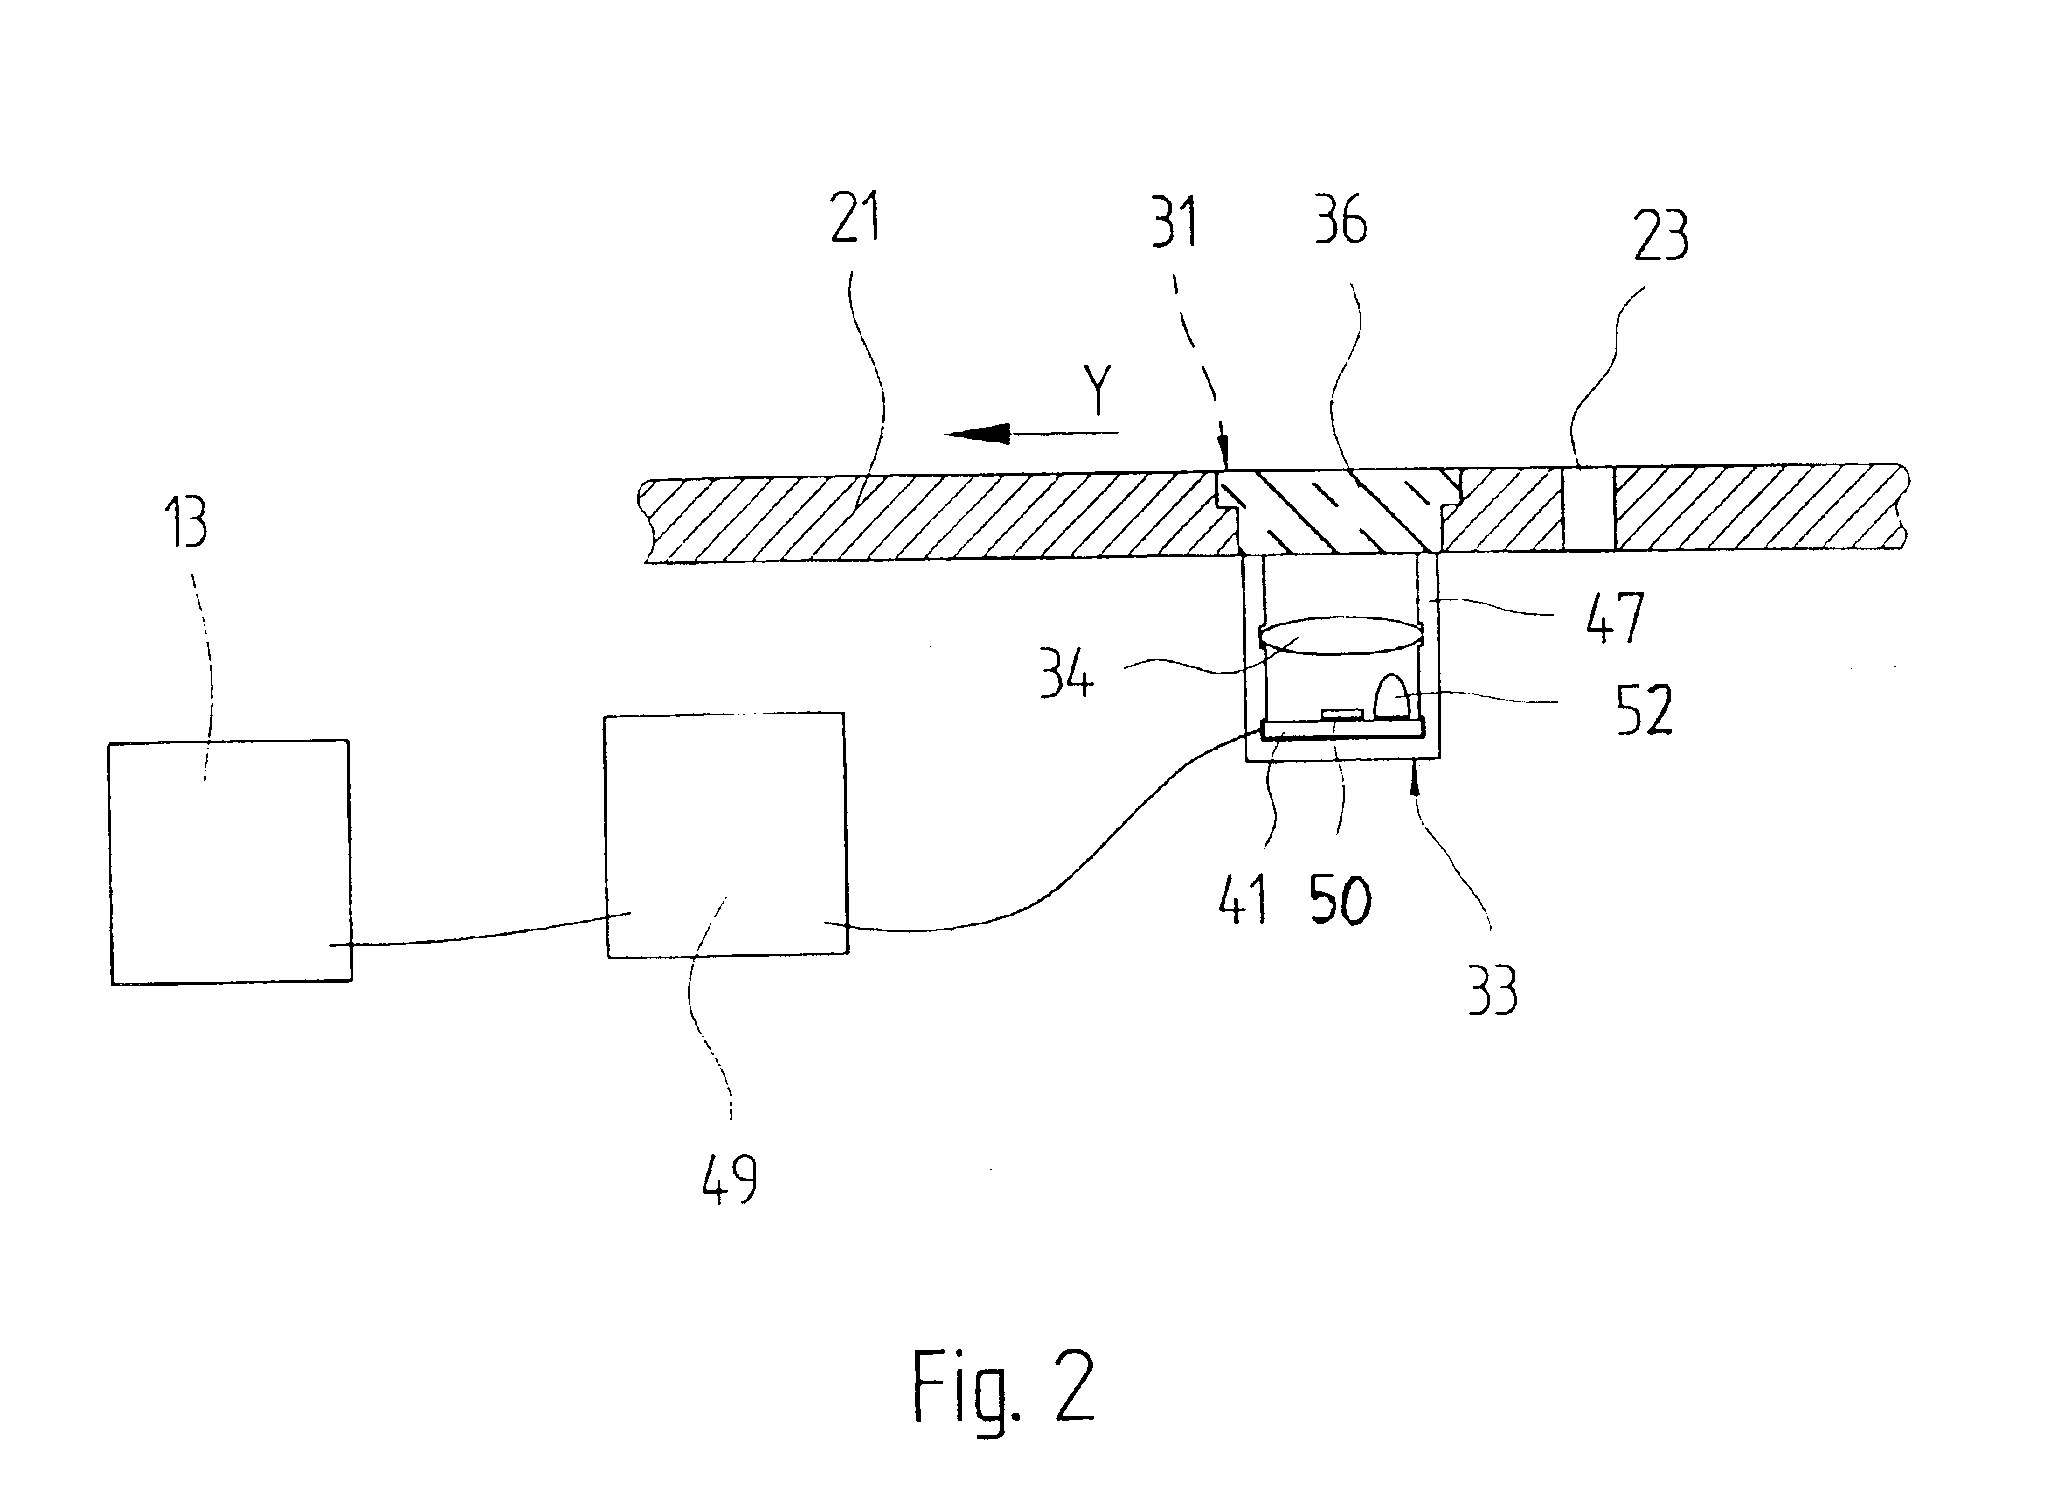 Method and device for regulating material transport in a sewing or embroidery machine